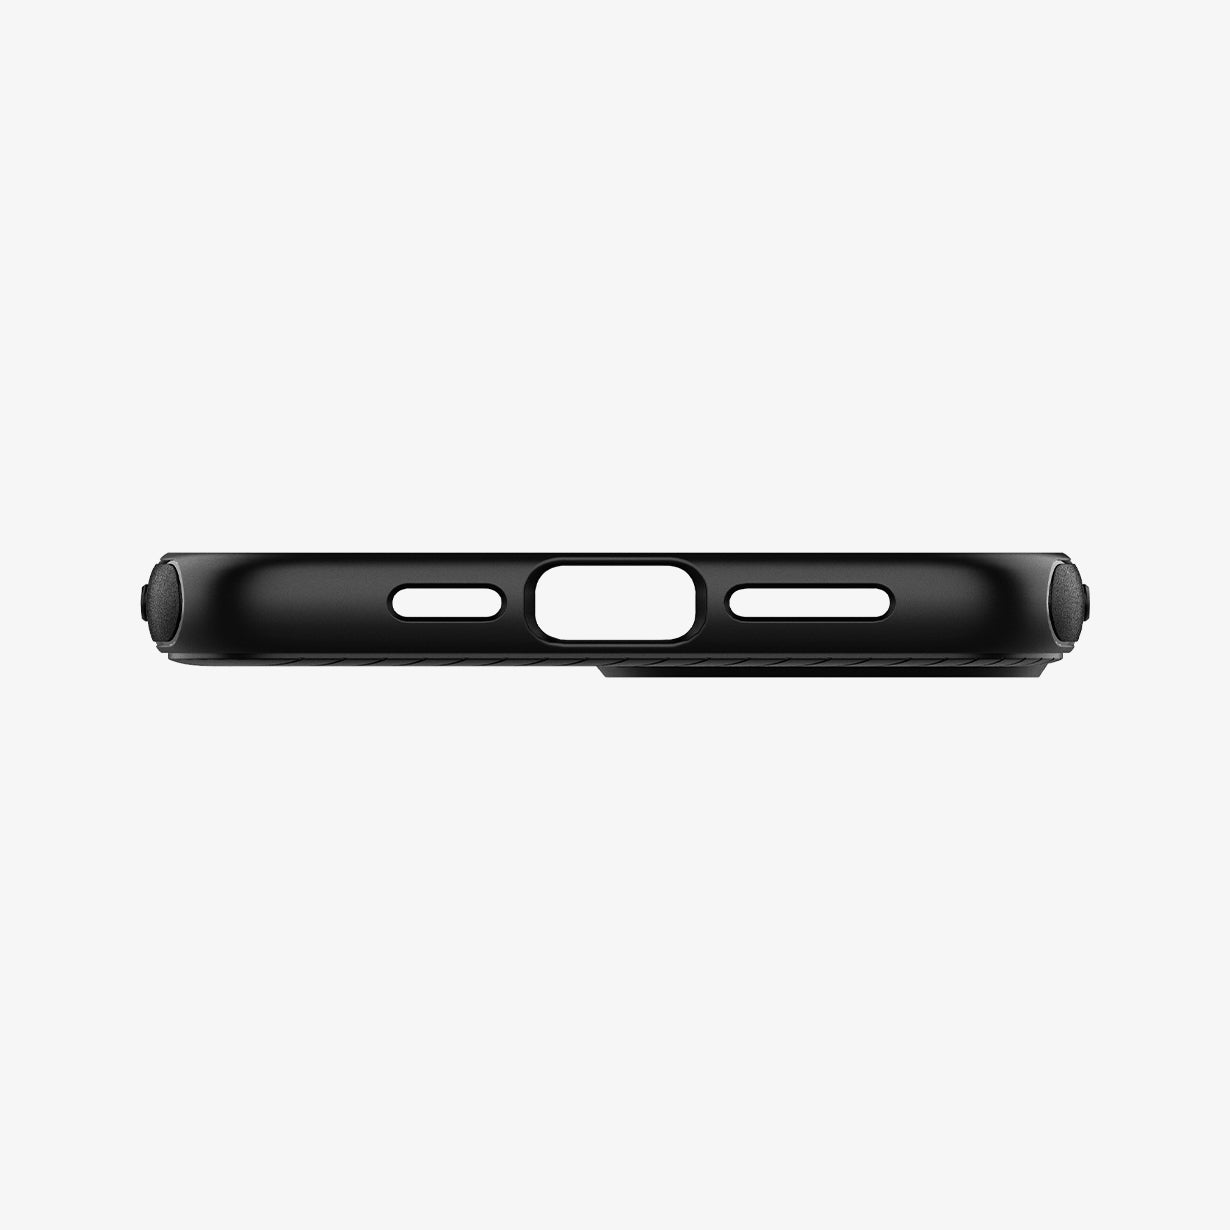 ACS01864 - iPhone 12 Pro Max Case MagArmor in black showing the bottom with precise cutouts